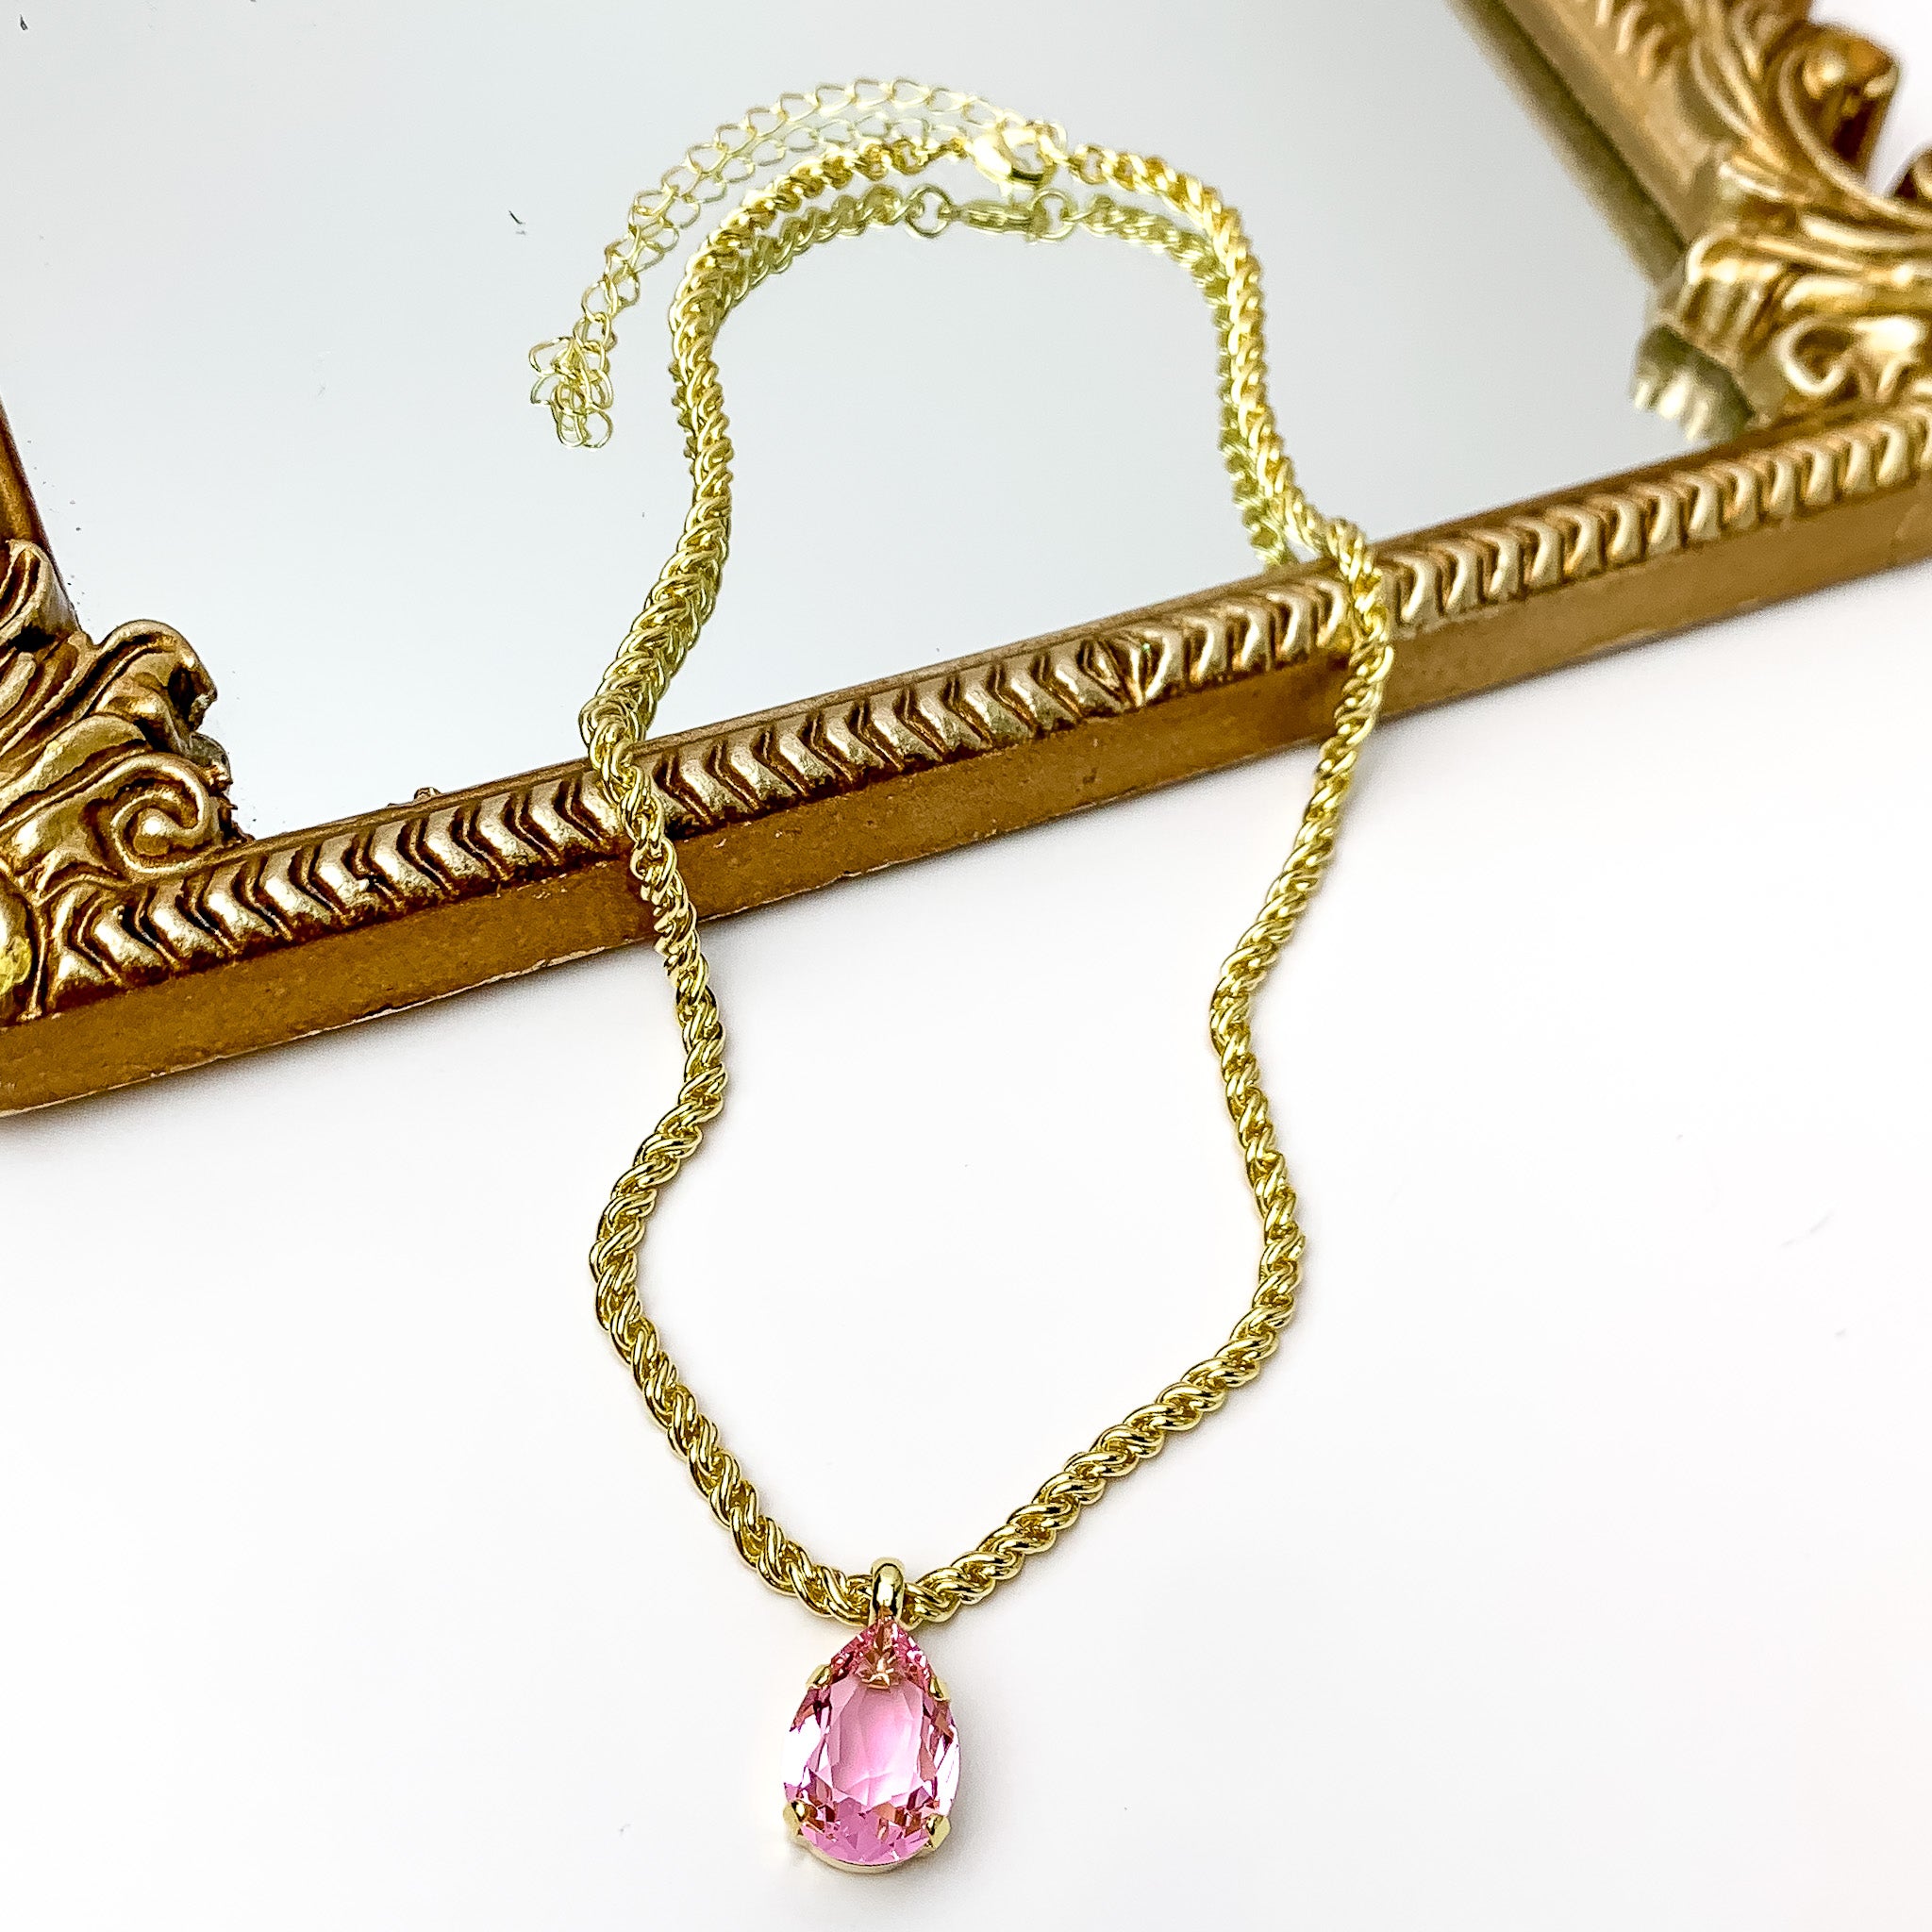 Pictured is a gold chain necklace with a pink teardrop crystal charm. This necklace is pictured partially laying on a gold mirror on a white background.